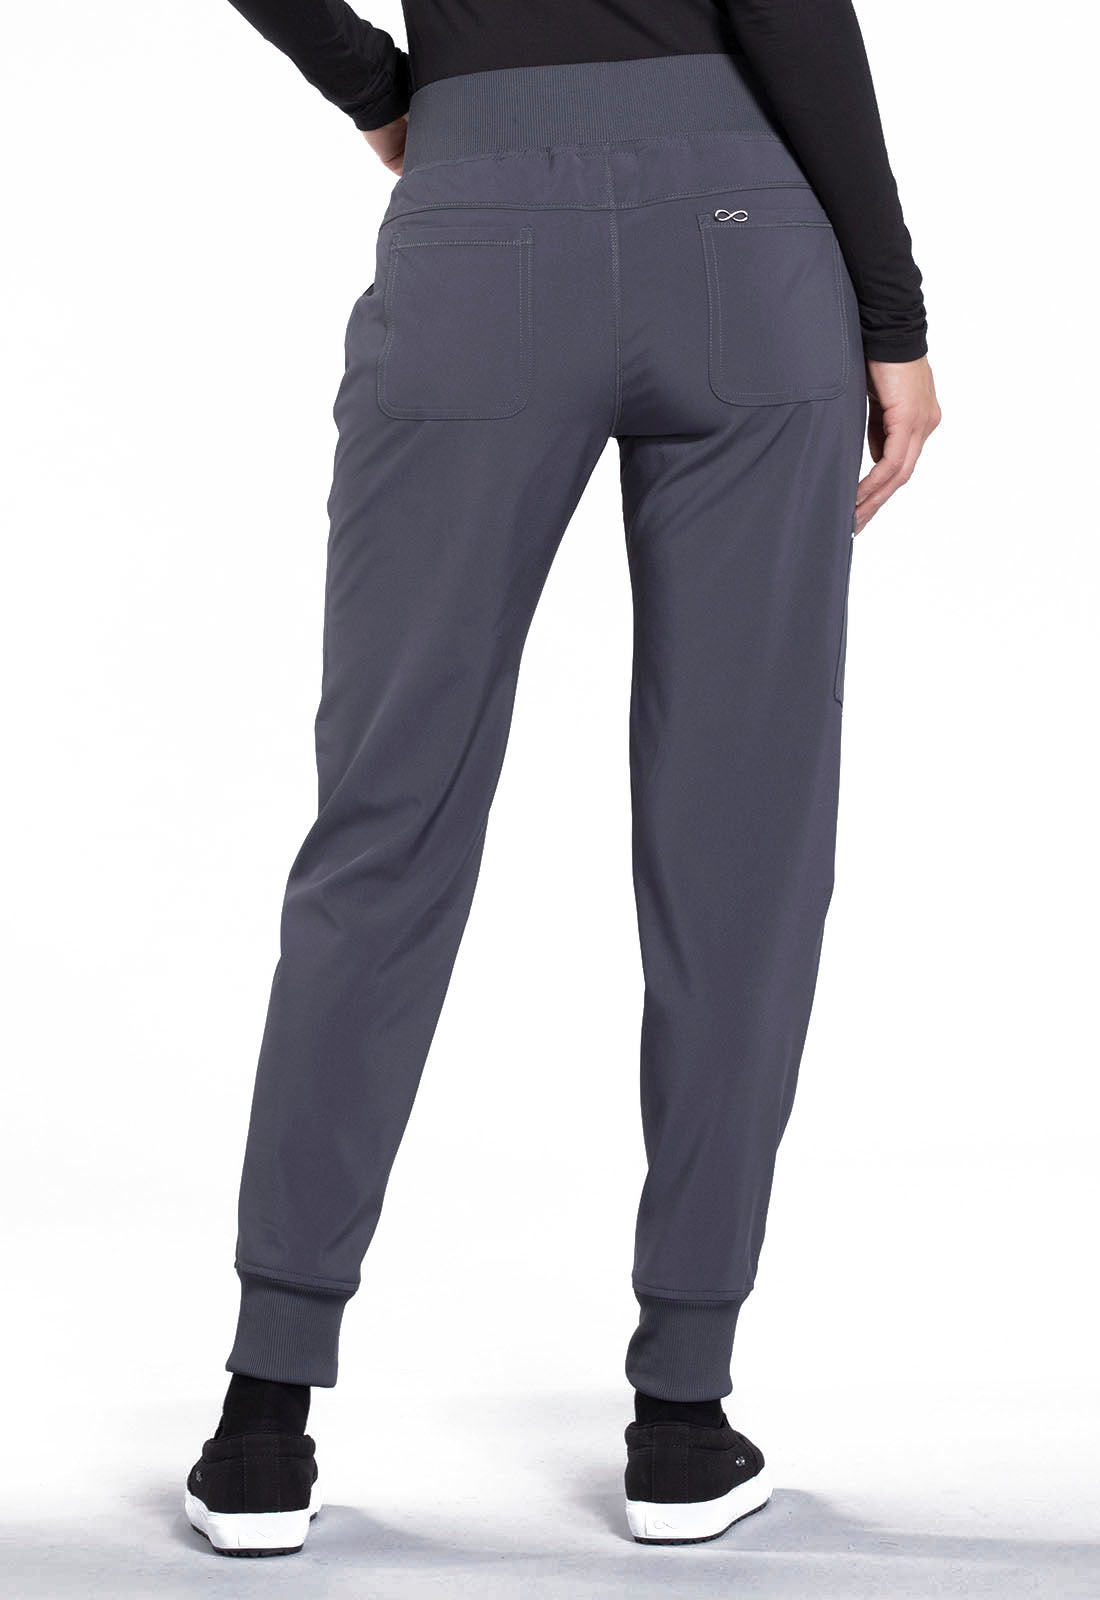 Cherokee Infinity CK110A Women's Jogger Pant pewter grey back 